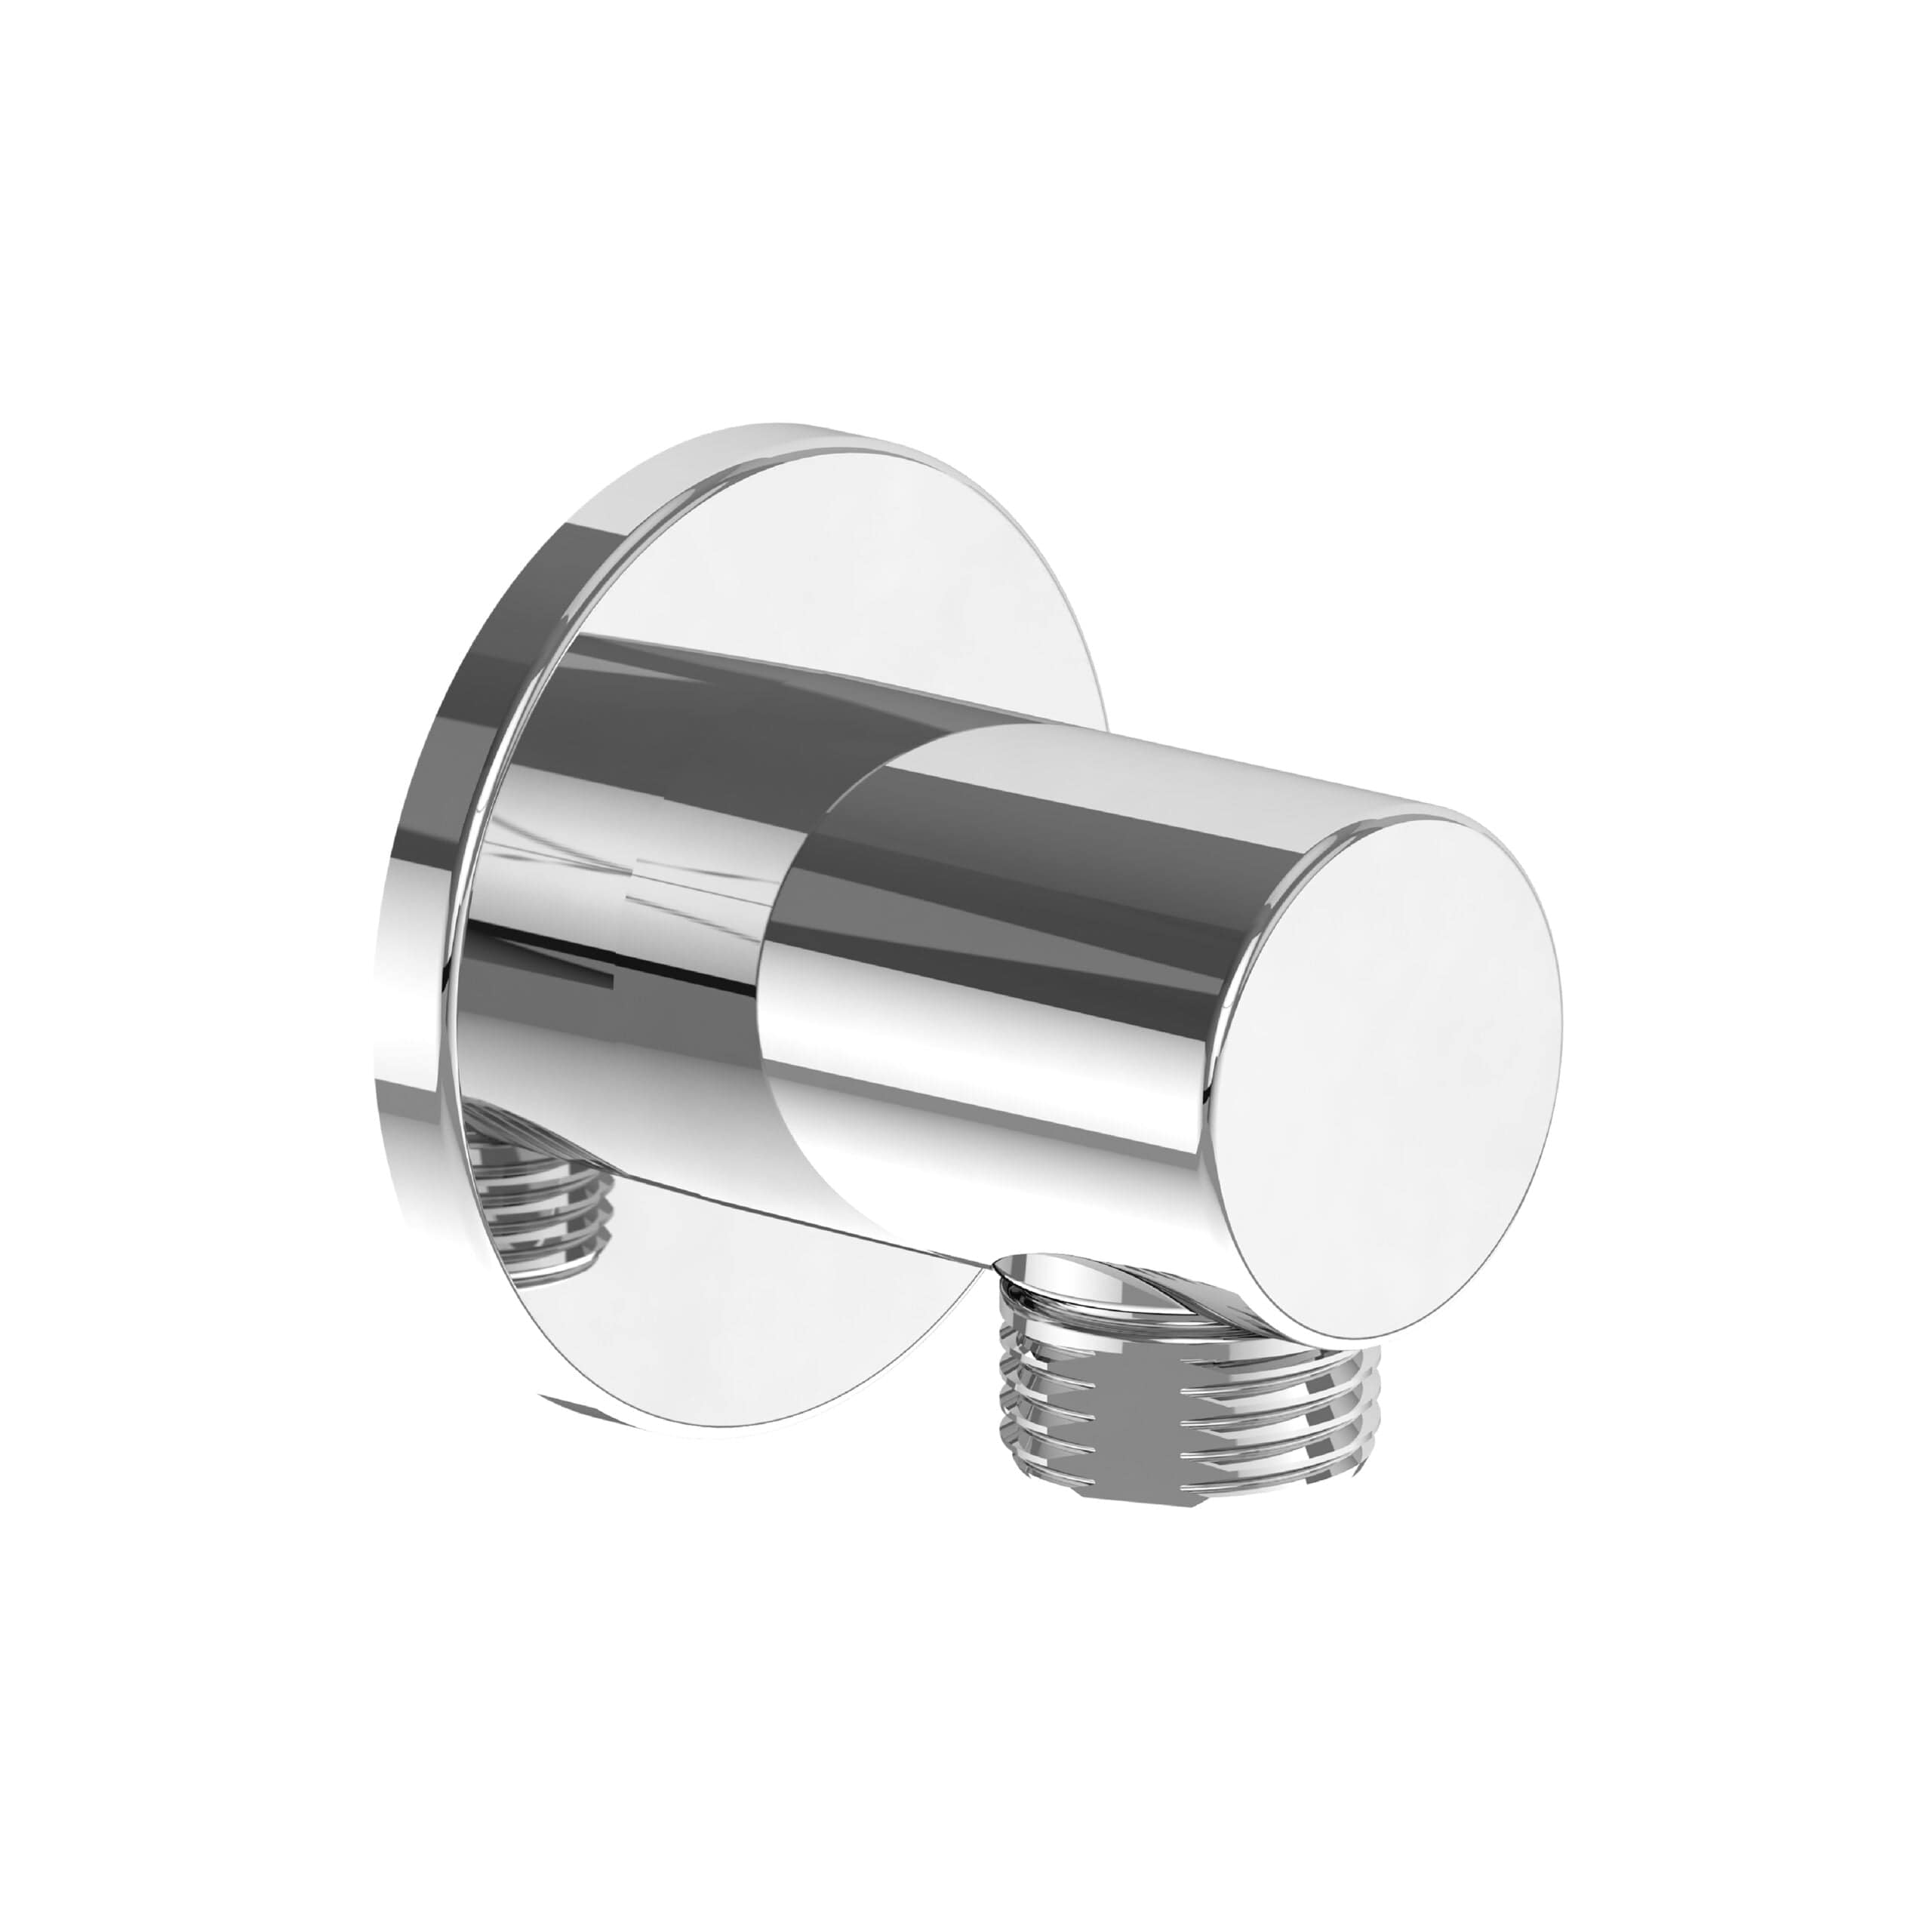 Villeroy & Boch Universal Showers Round Wall Outlet for Hose in Brushed Chrome | Supply Master | Accra, Ghana Bathroom Accessories Buy Tools hardware Building materials